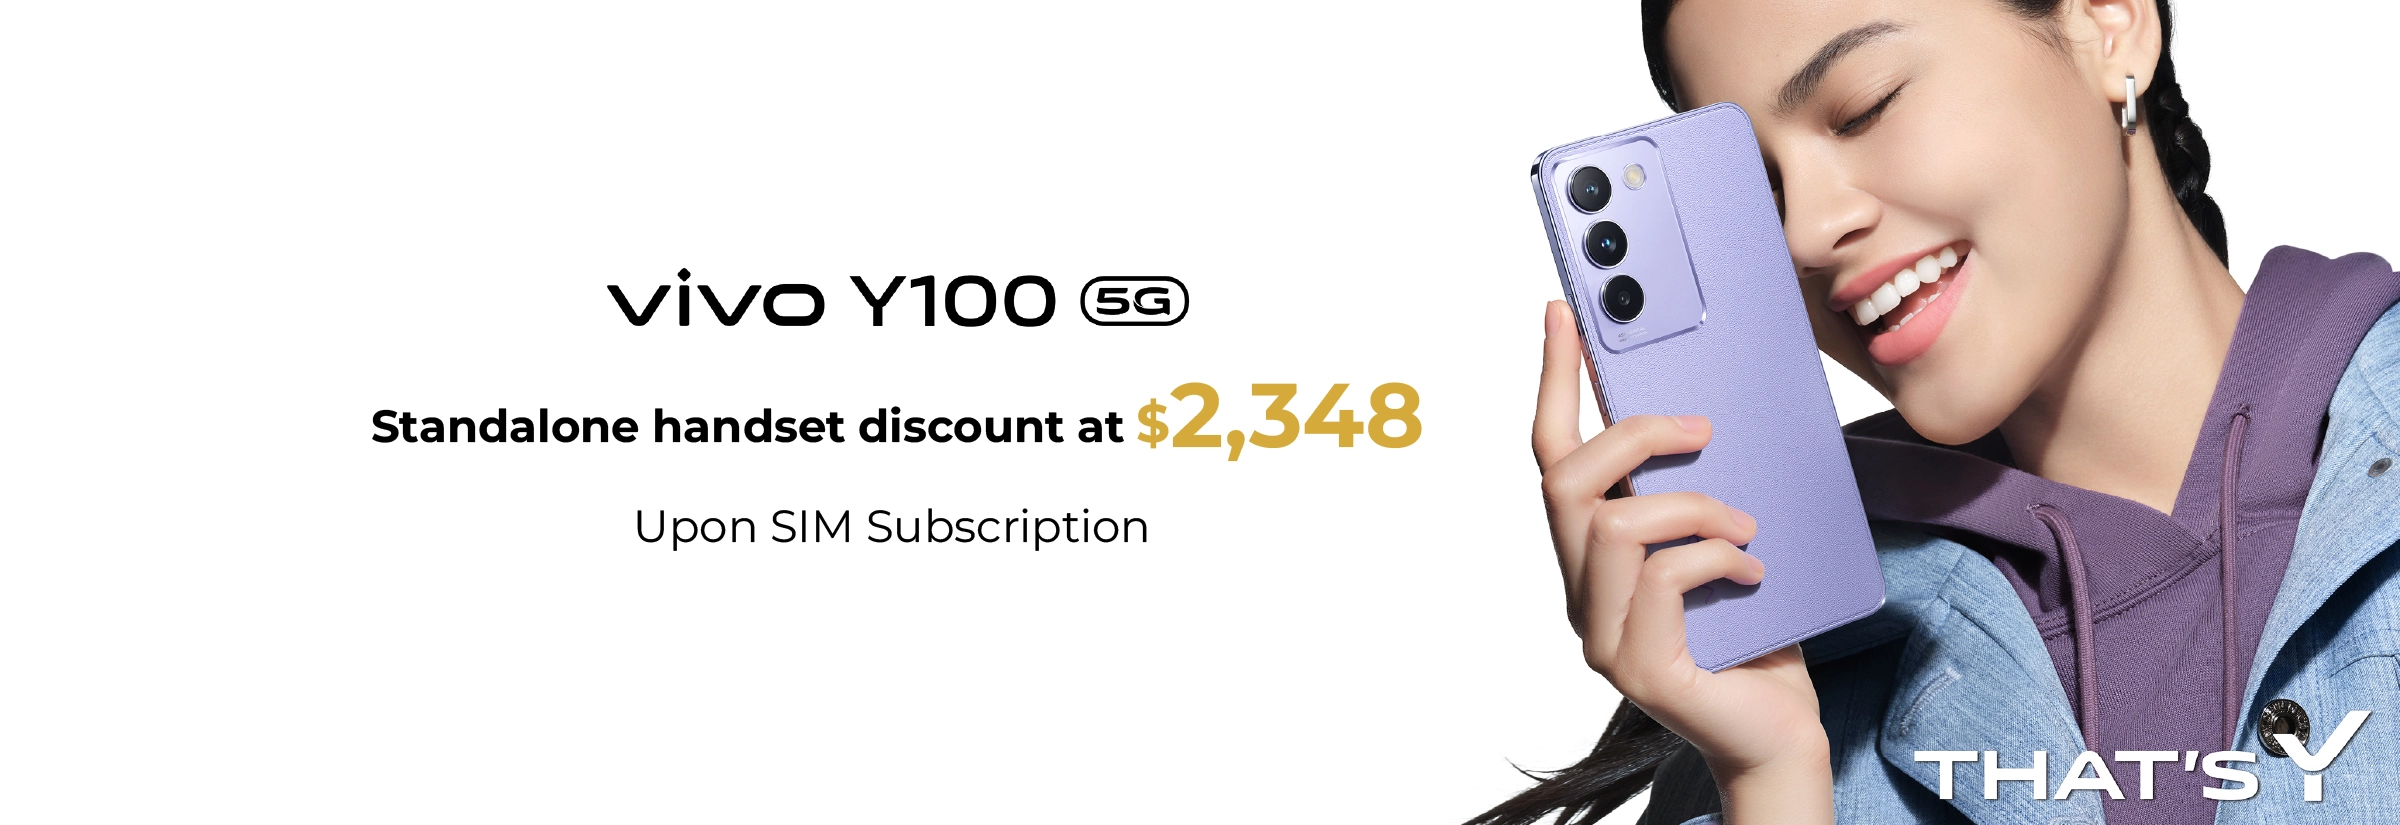 $1,900 Standalone Discount upon 5G SIM Subscription / contract renewal